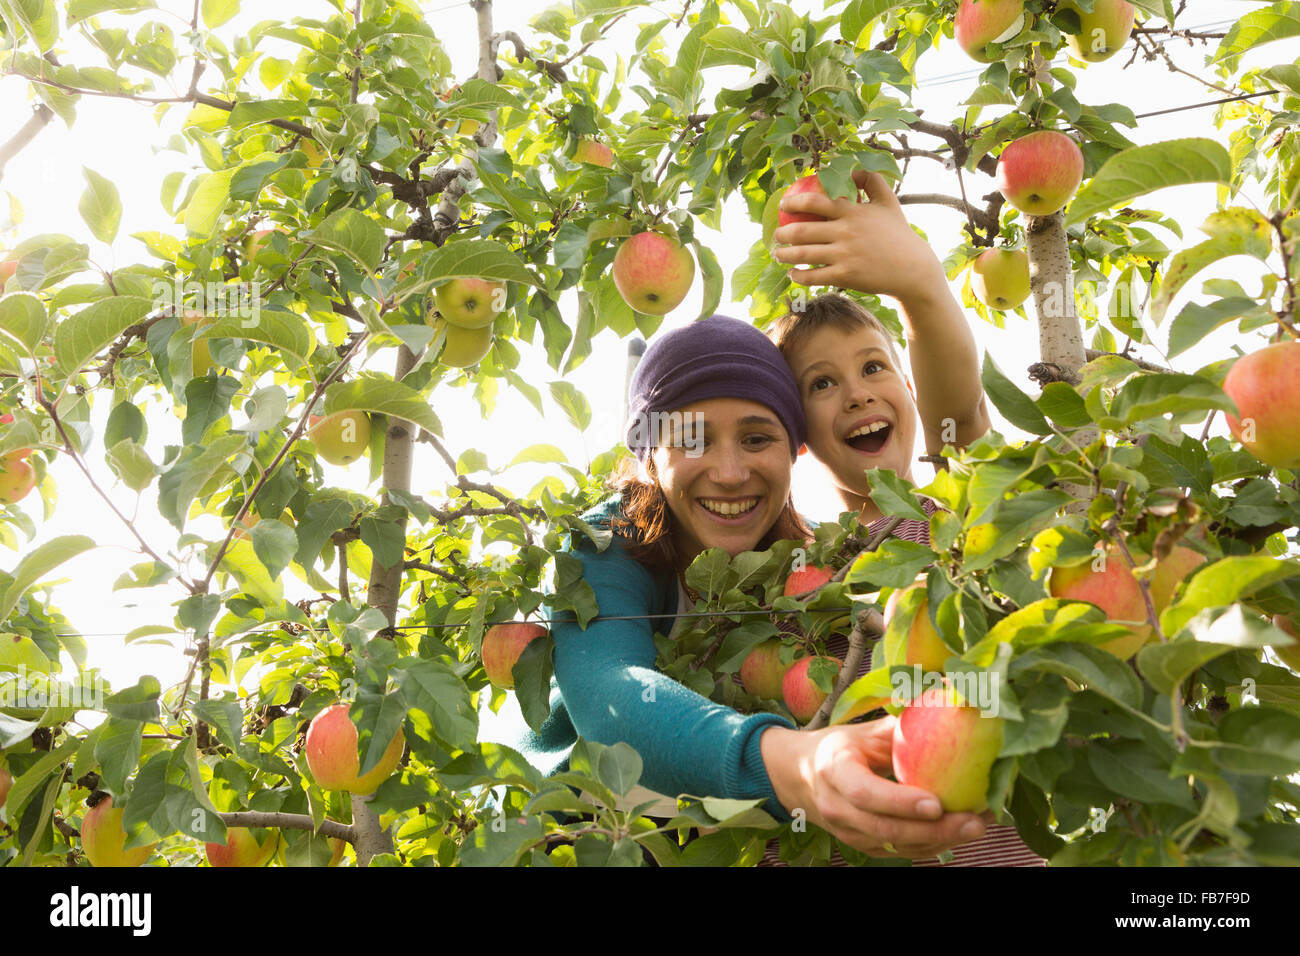 Cheerful mother and son picking apples at orchard Stock Photo